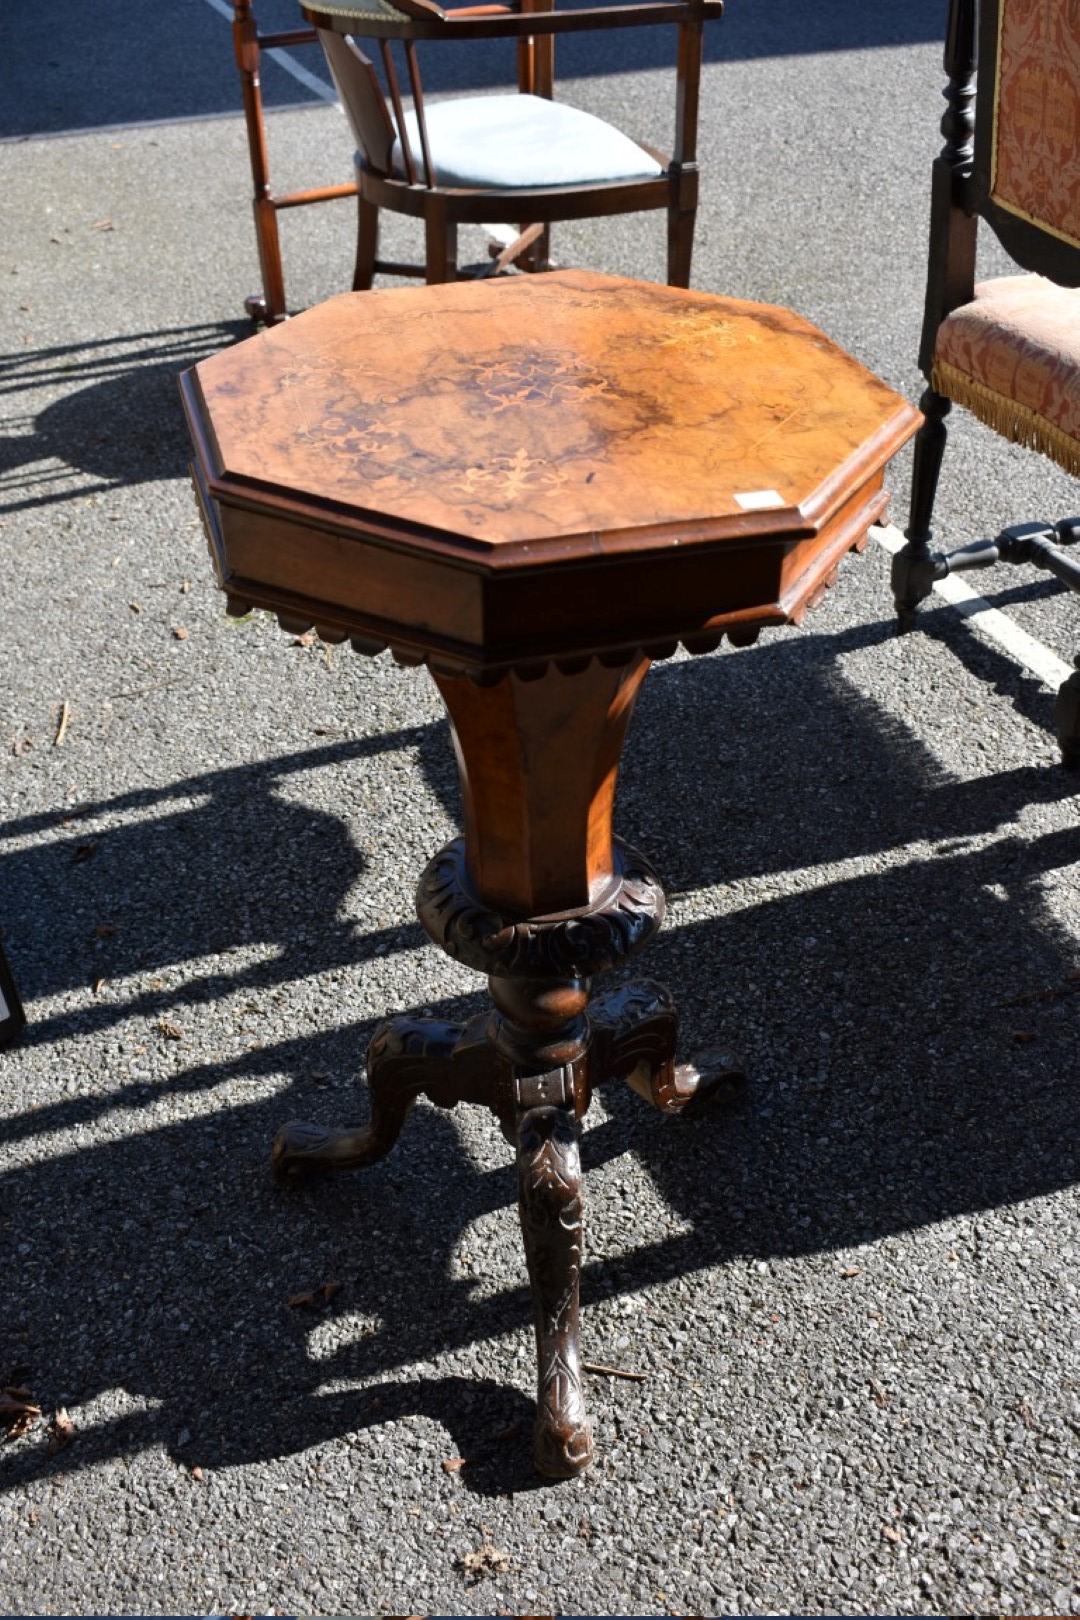 A circa 1880 carved oak chair; together with a desk type chair and an old trumpet work table. - Image 5 of 8